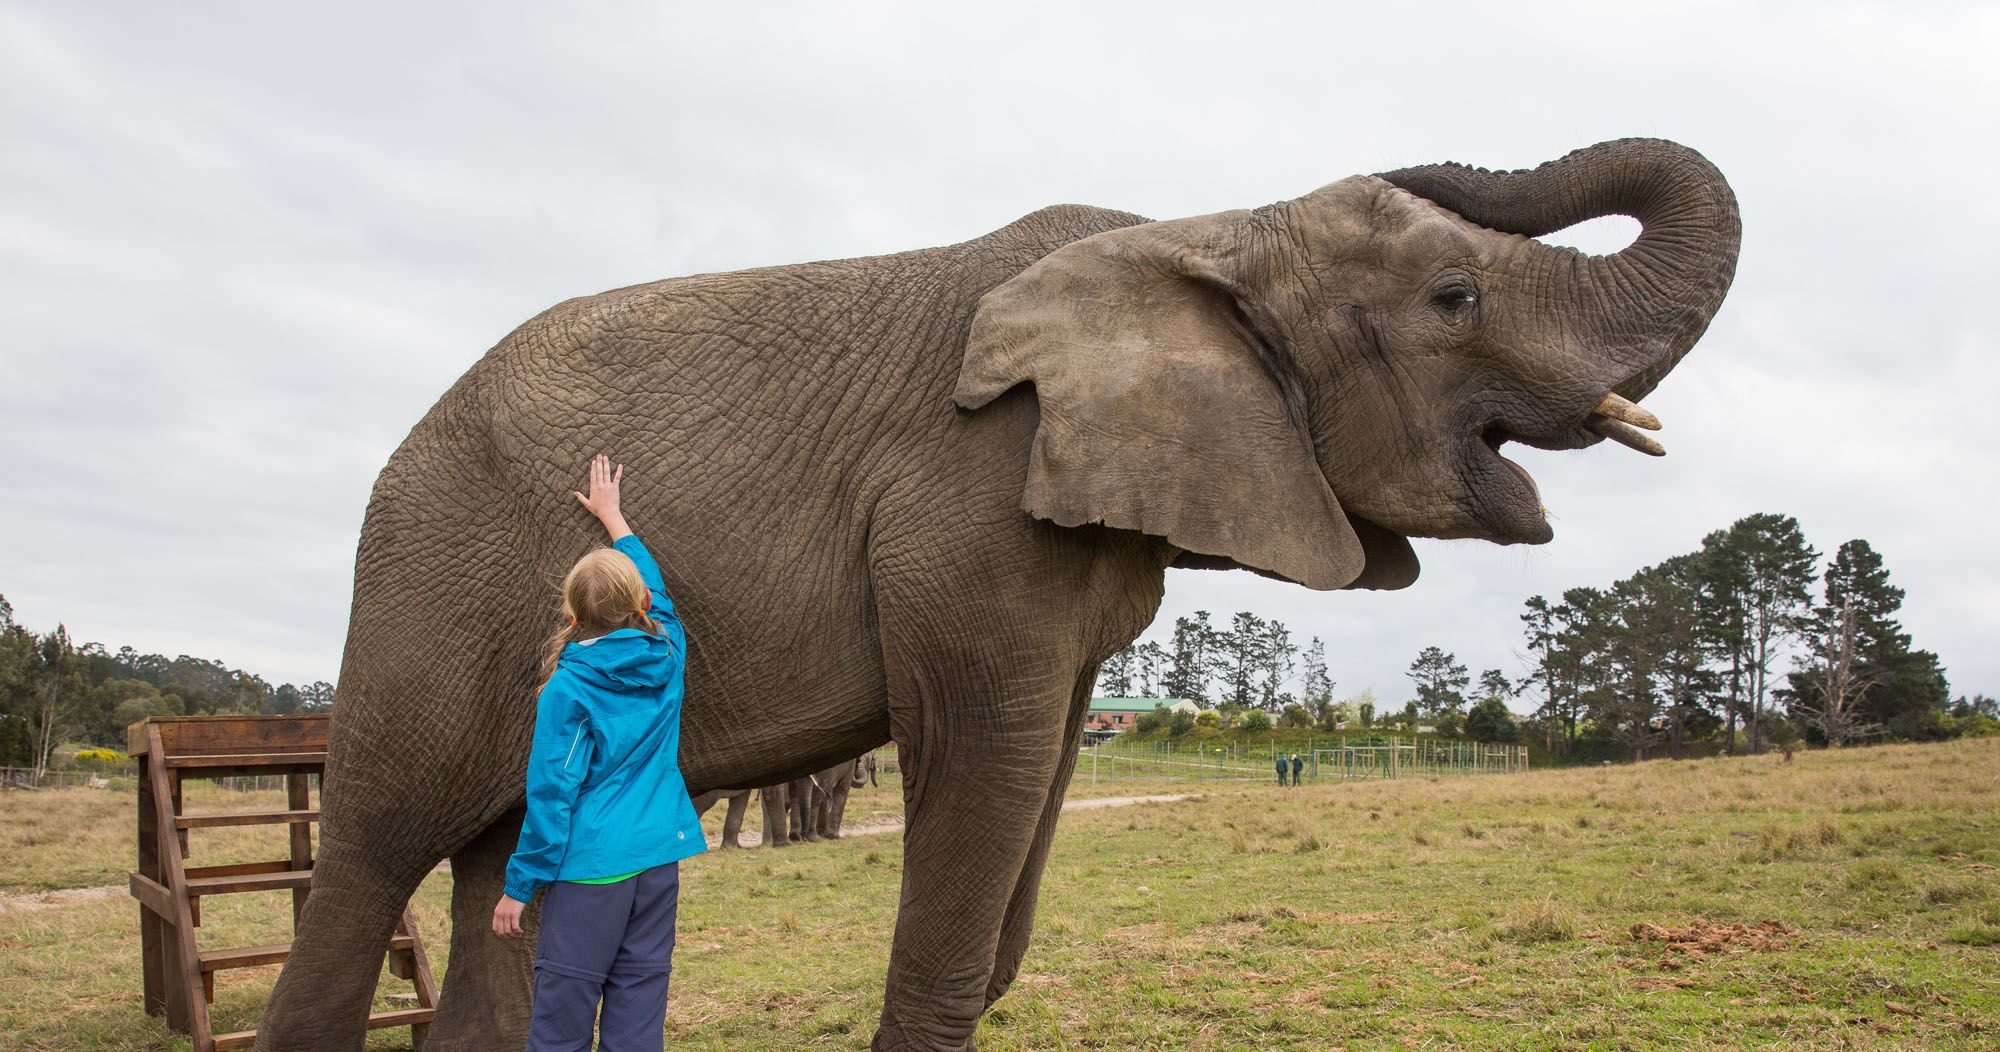 Featured image for “Elephants, Ostriches, and Cheetahs, Oh My!  Animal Encounters on the Garden Route of South Africa”